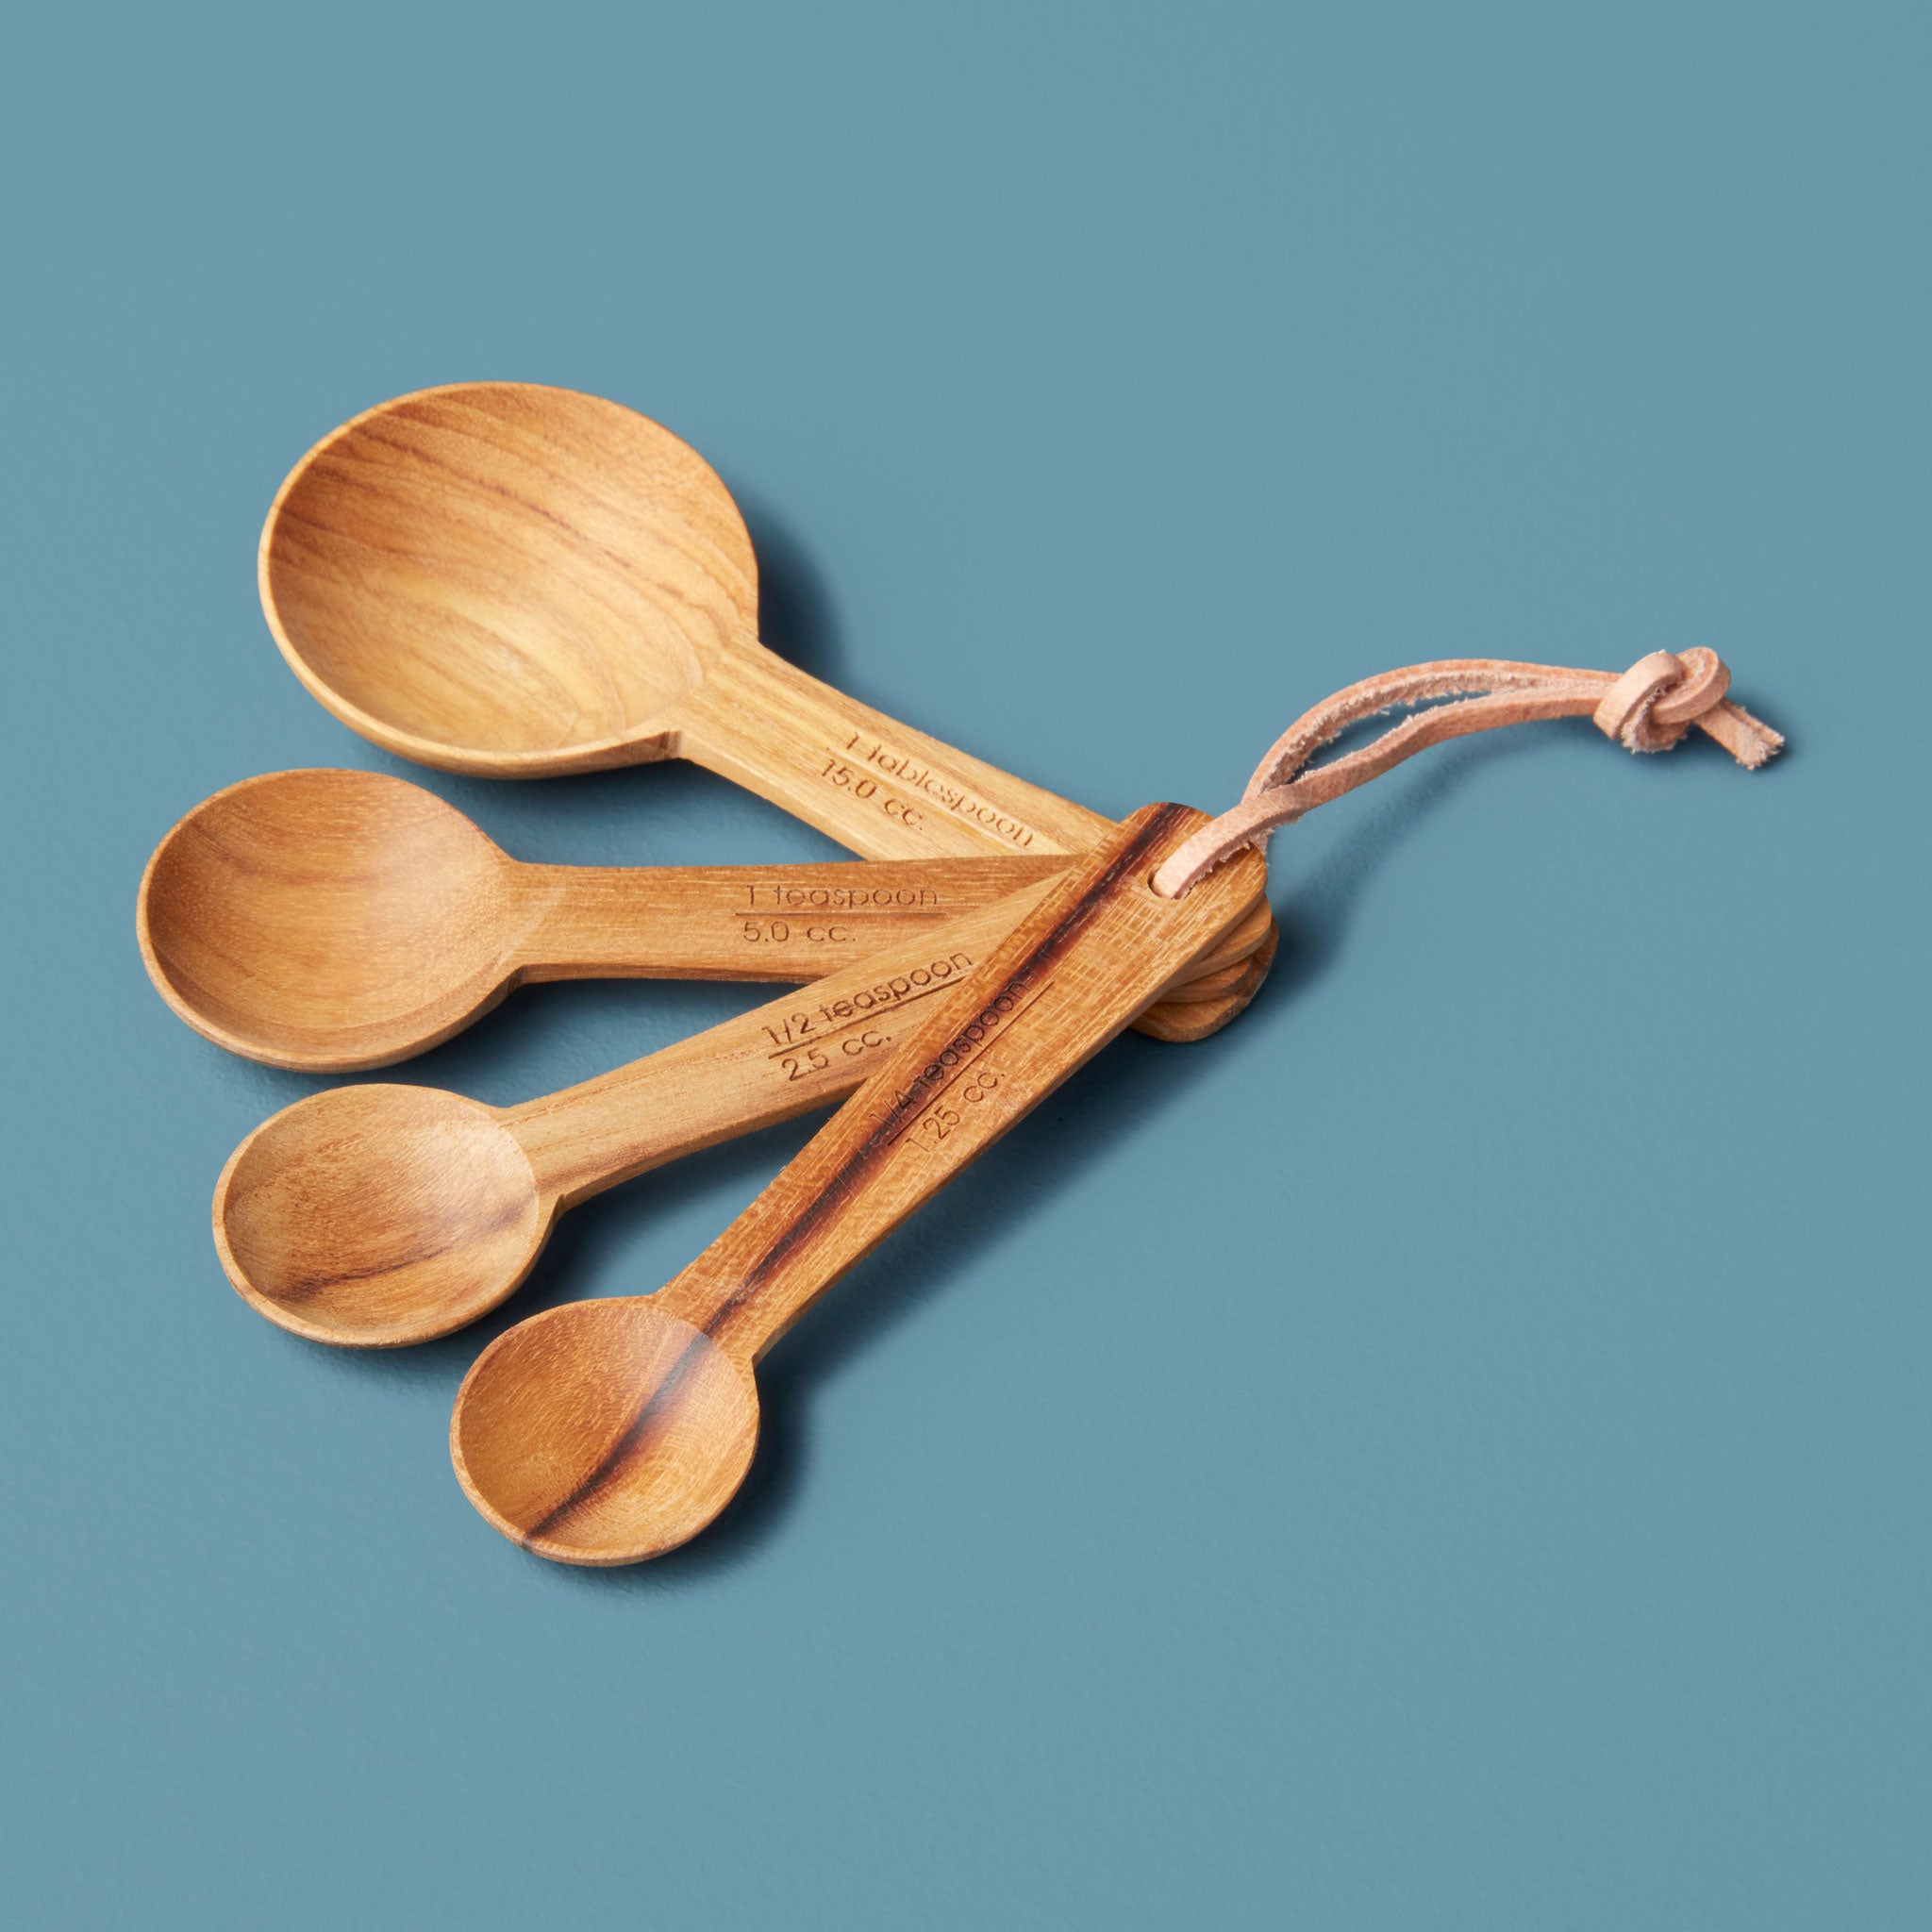 https://behome.com/cdn/shop/products/Be-Home_Teak-Round-Measuring-Spoons-Set-of-4_39-66.jpg?v=1605656876&width=3840